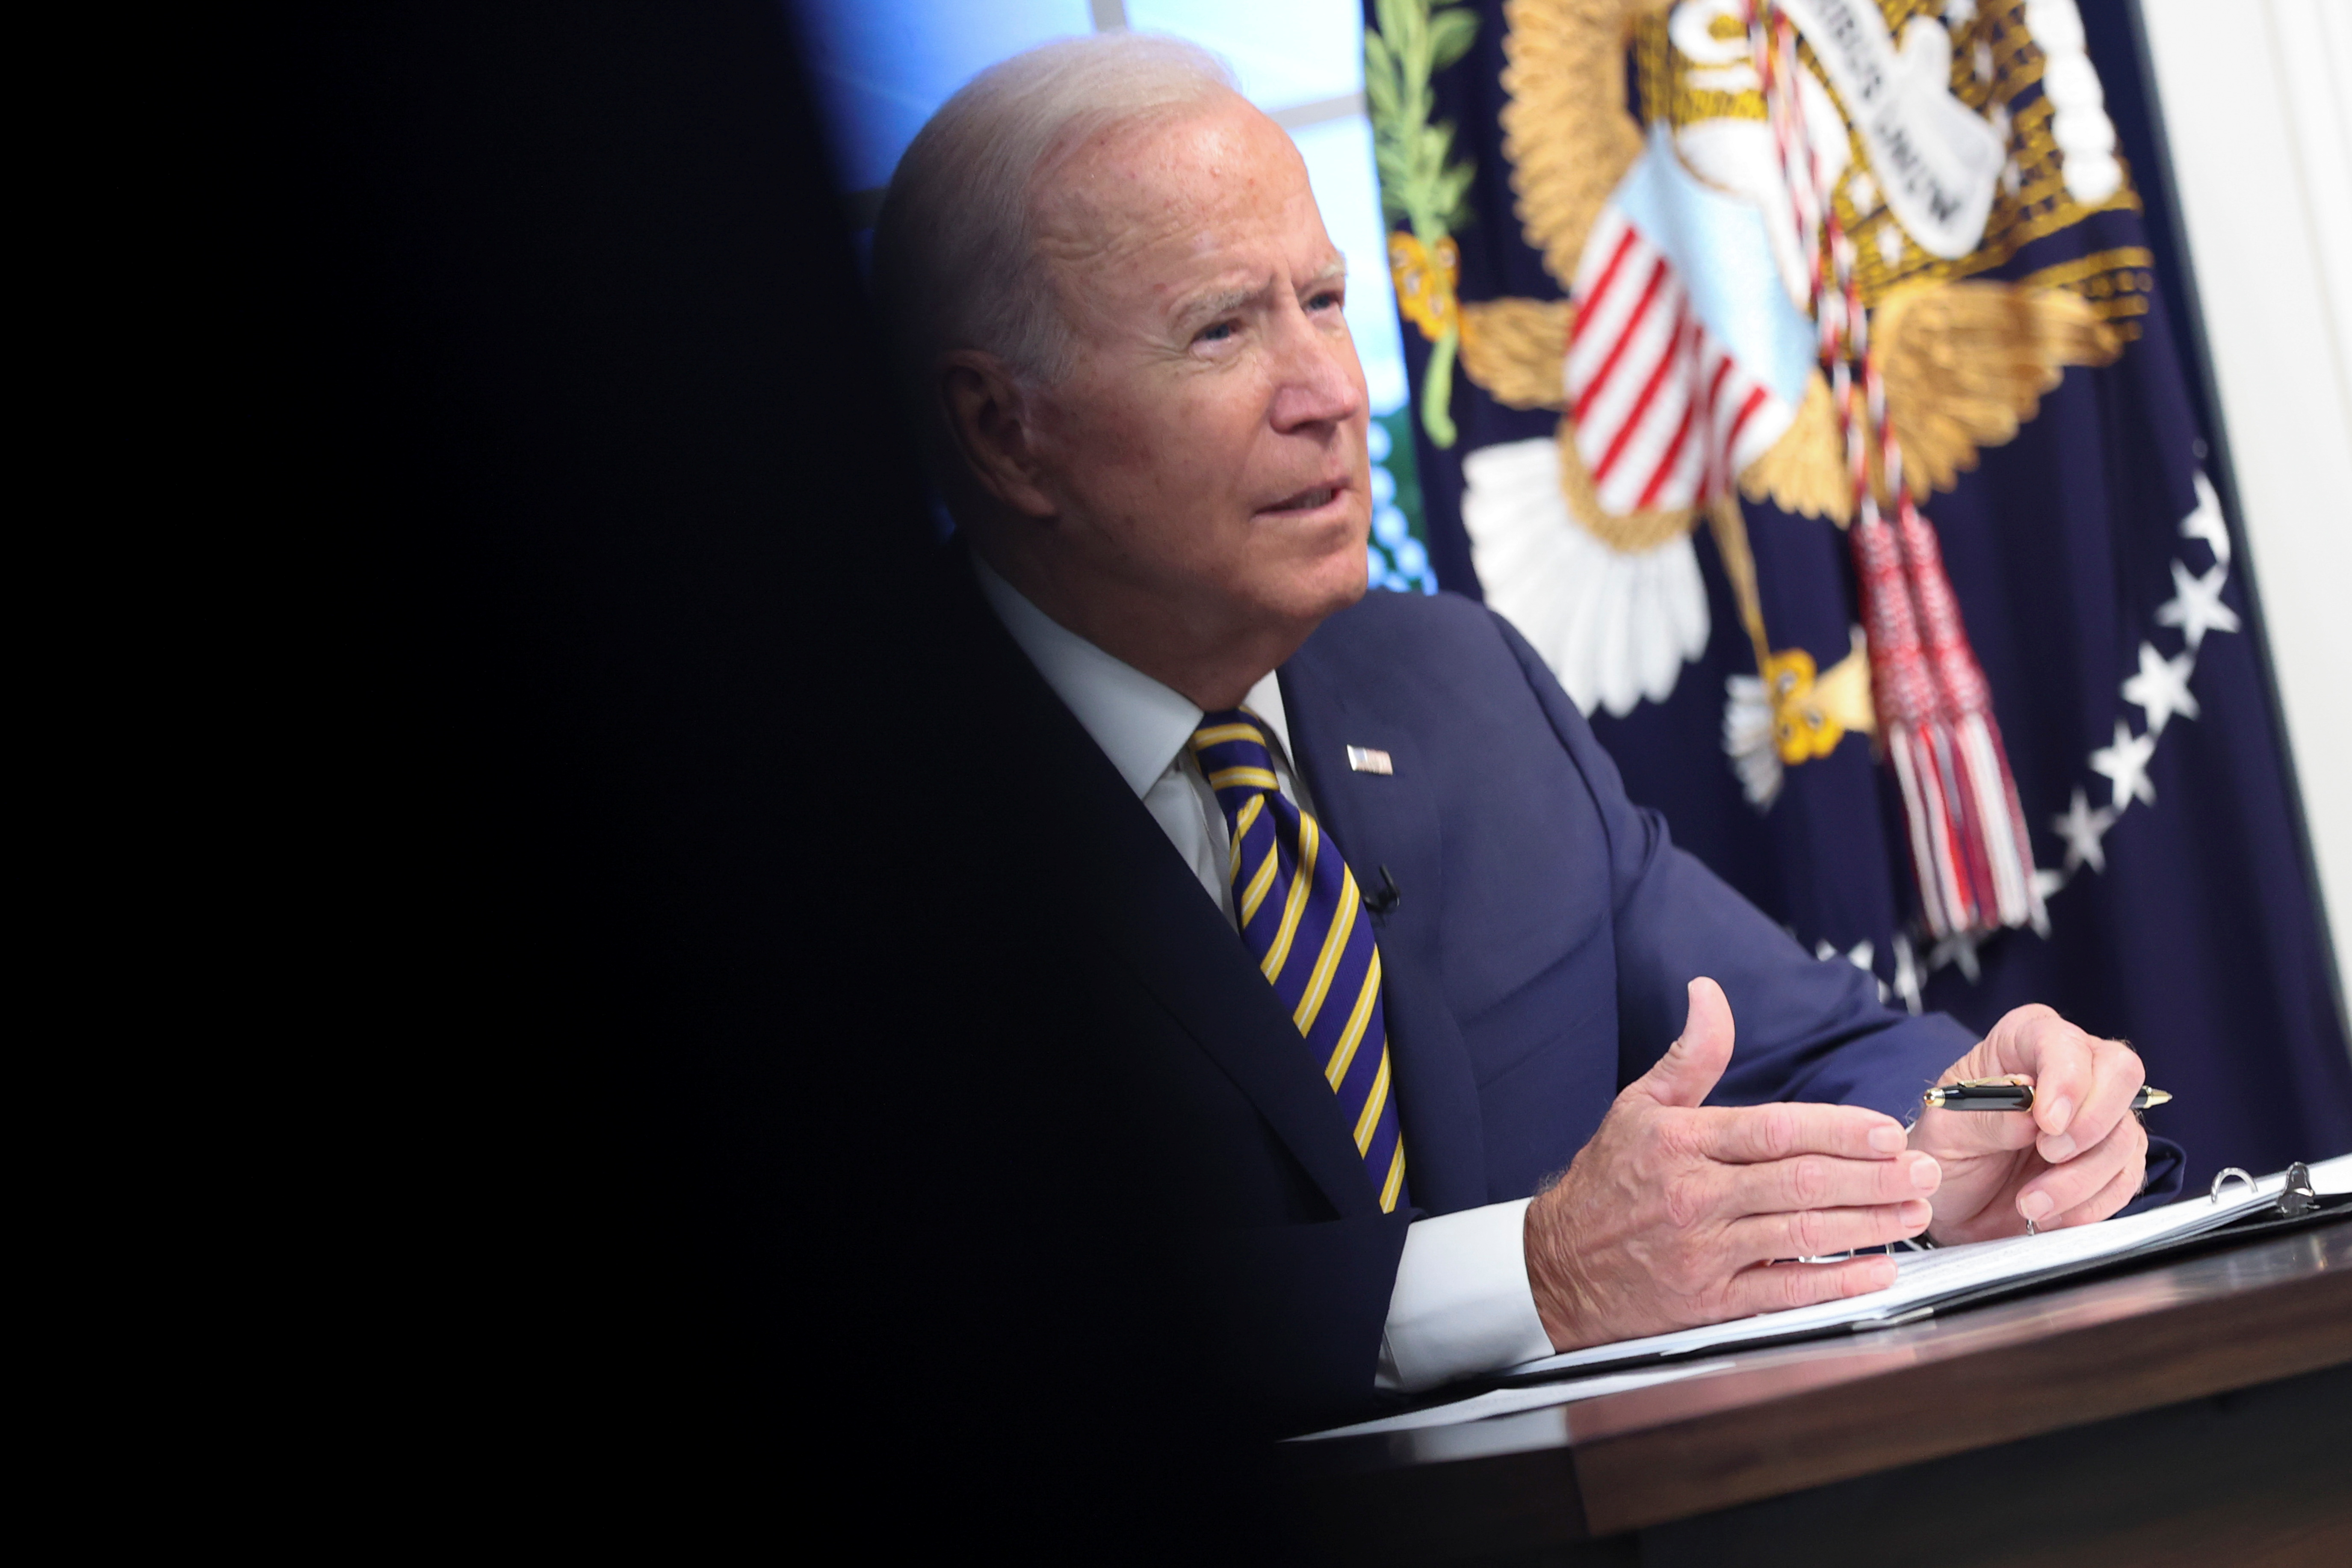 U.S. President Biden participates in a meeting of MEF on climate change, from an auditorium at the White House in Washington